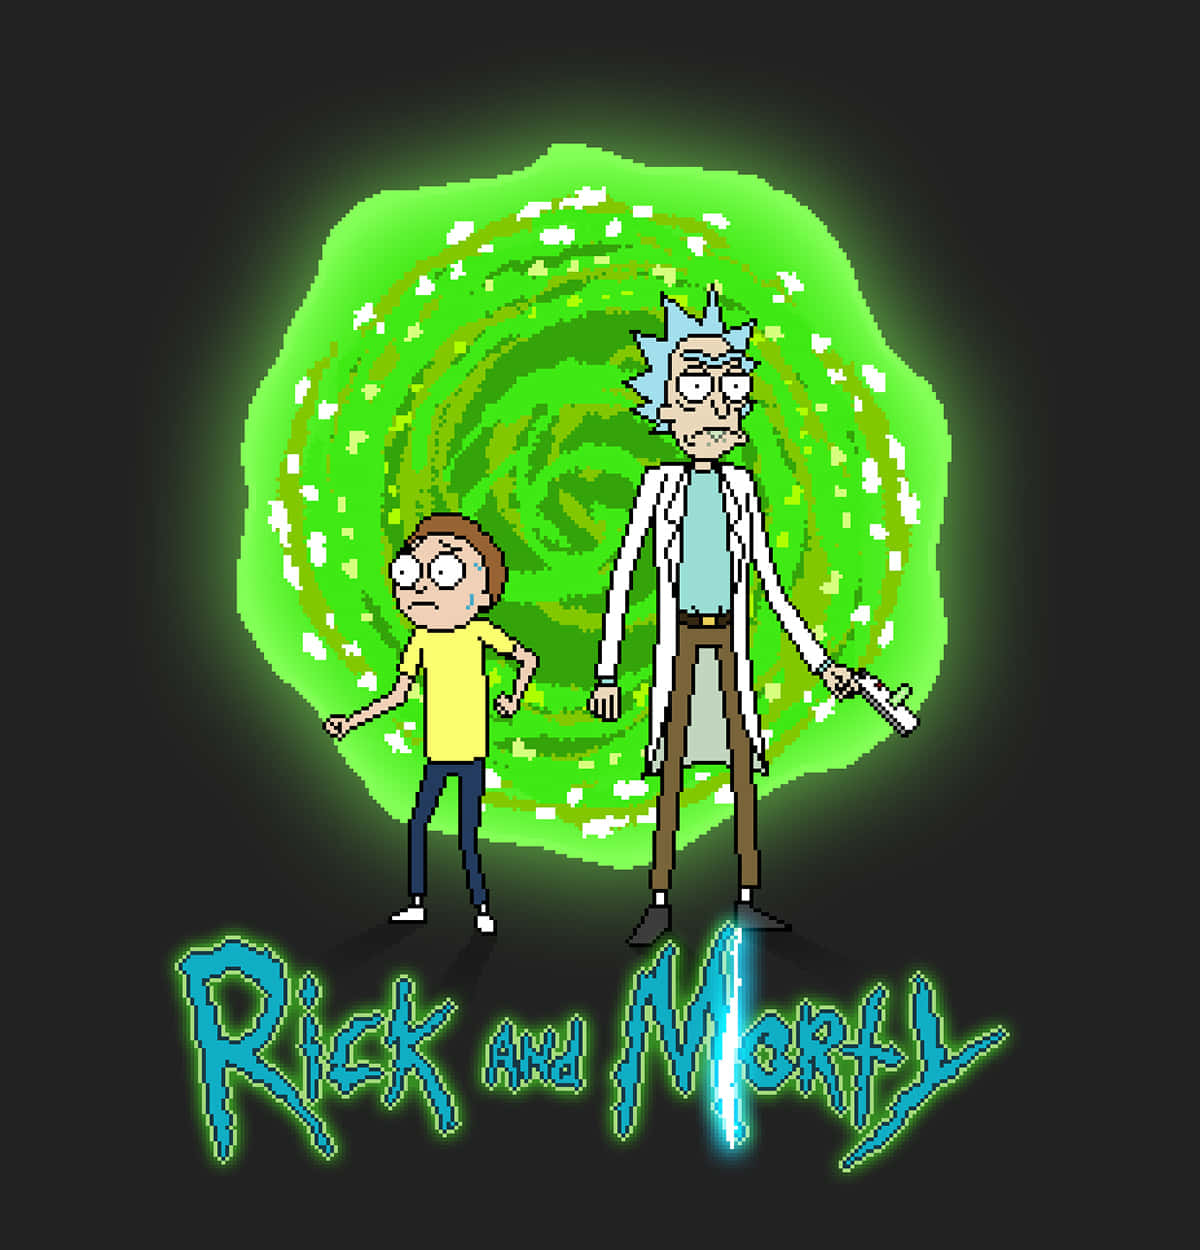 Rick Sanchez and Morty Smith of Rick And Morty